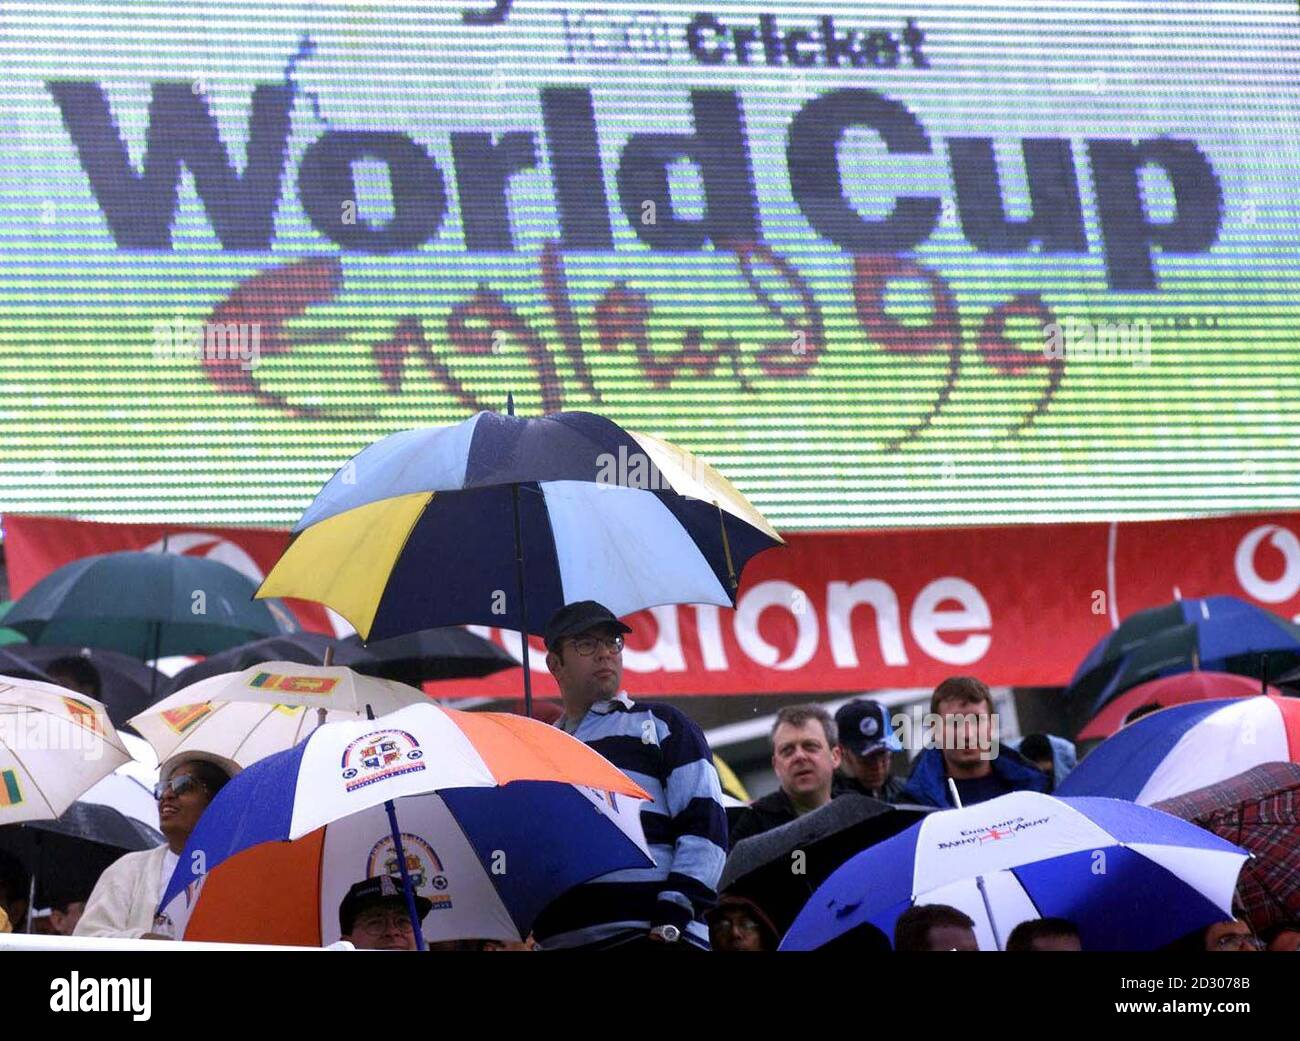 cricket fans put up their umbrellas as rain prevents play for a short time at the start of the opening game of the 1999 cricket World Cup, between England and Sri Lanka, at Lord's cricket ground in London. Stock Photo